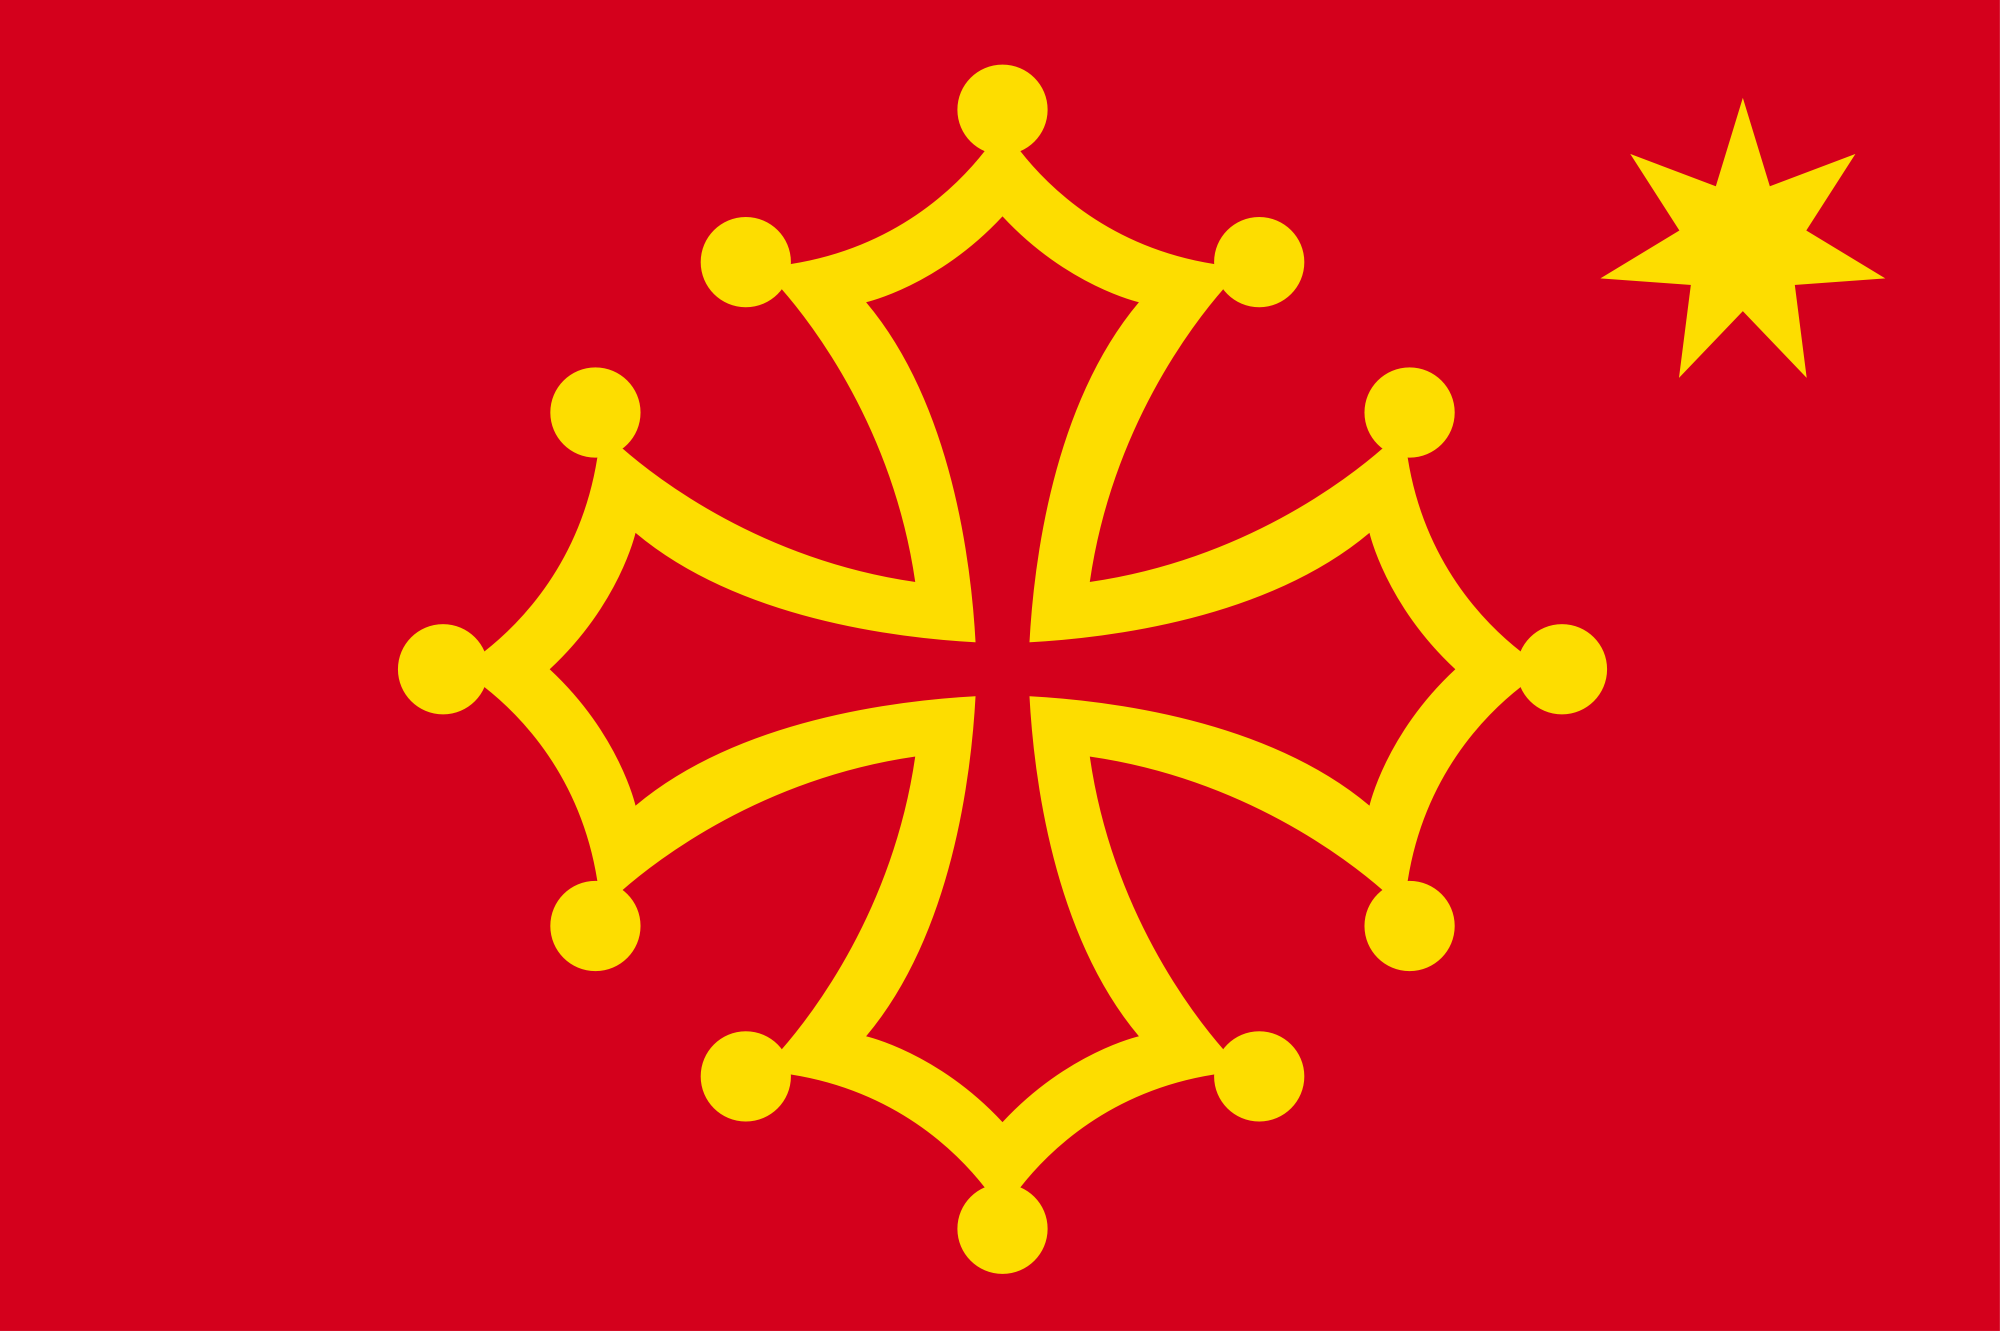 2000px-Flag_of_Occitania_(with_star).svg